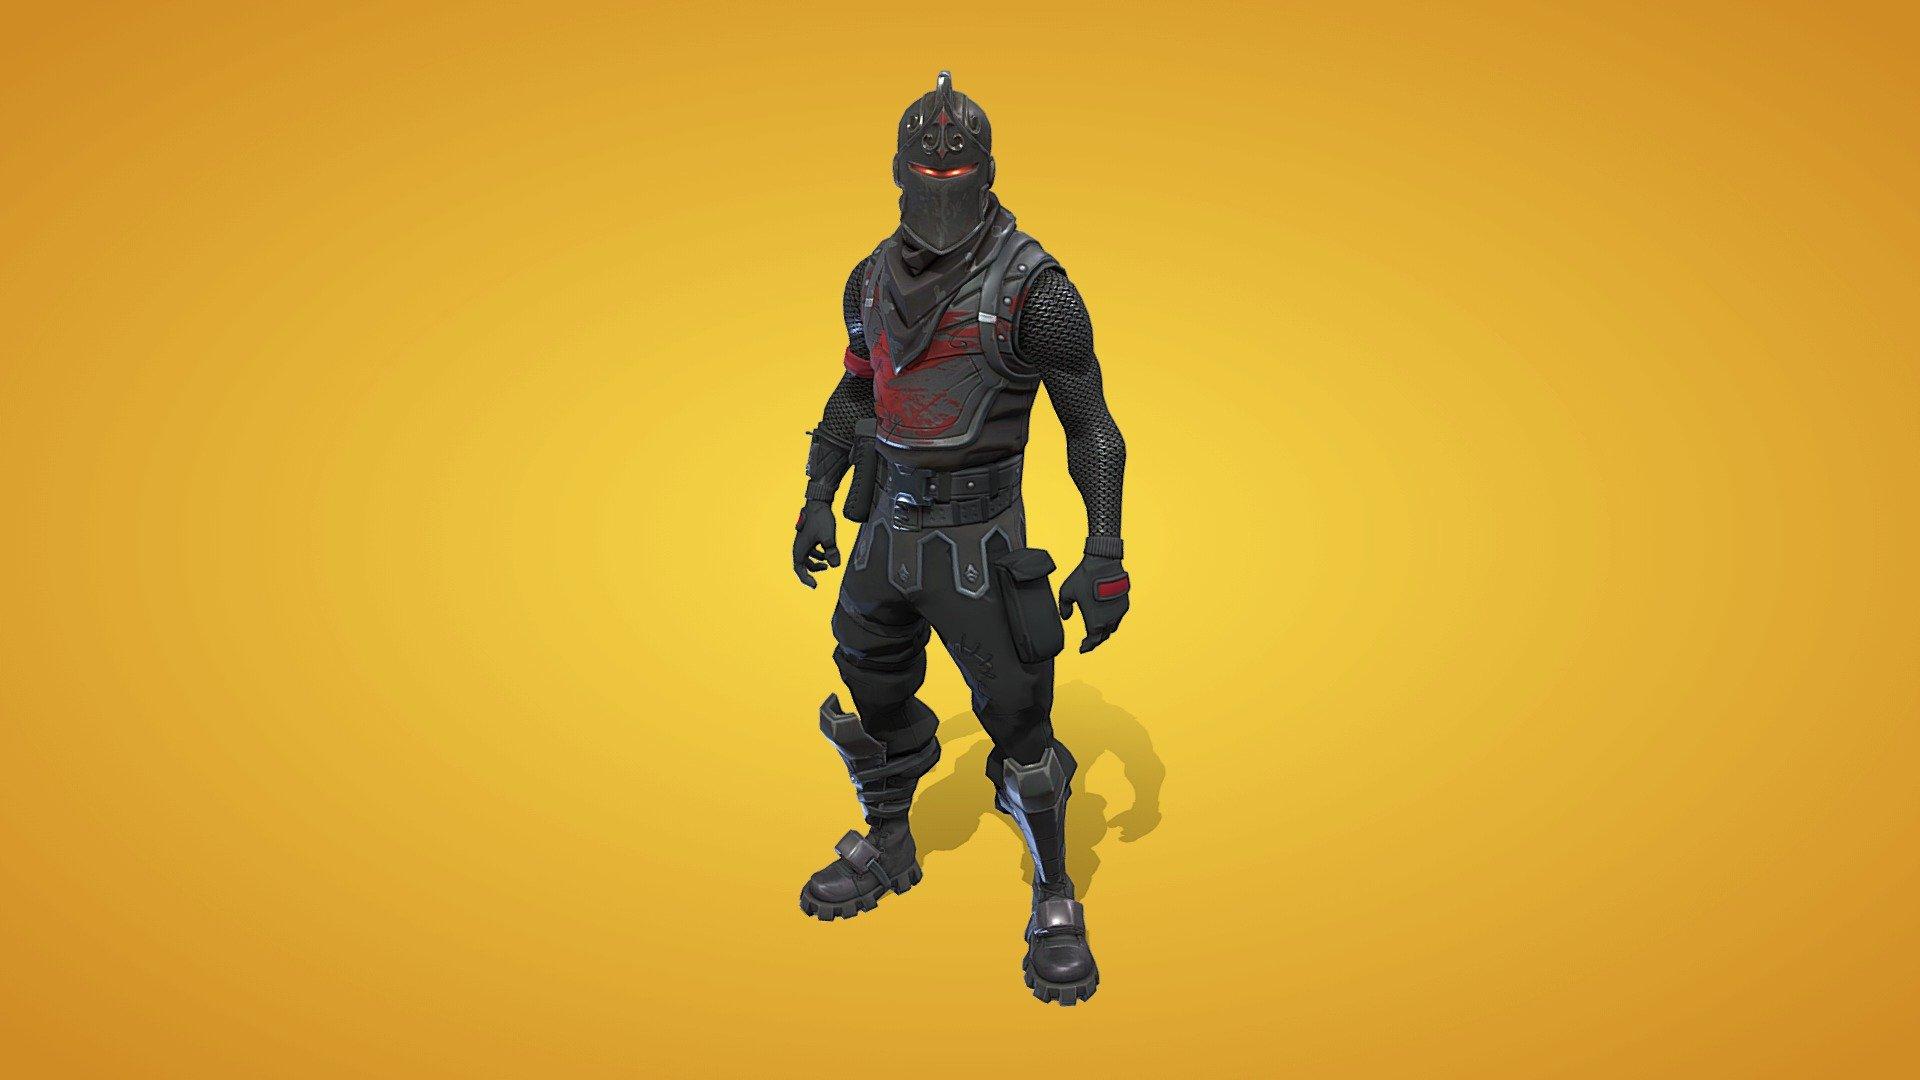 Black Knight Outfit model by Fortnite Skins [2c2c5cd]